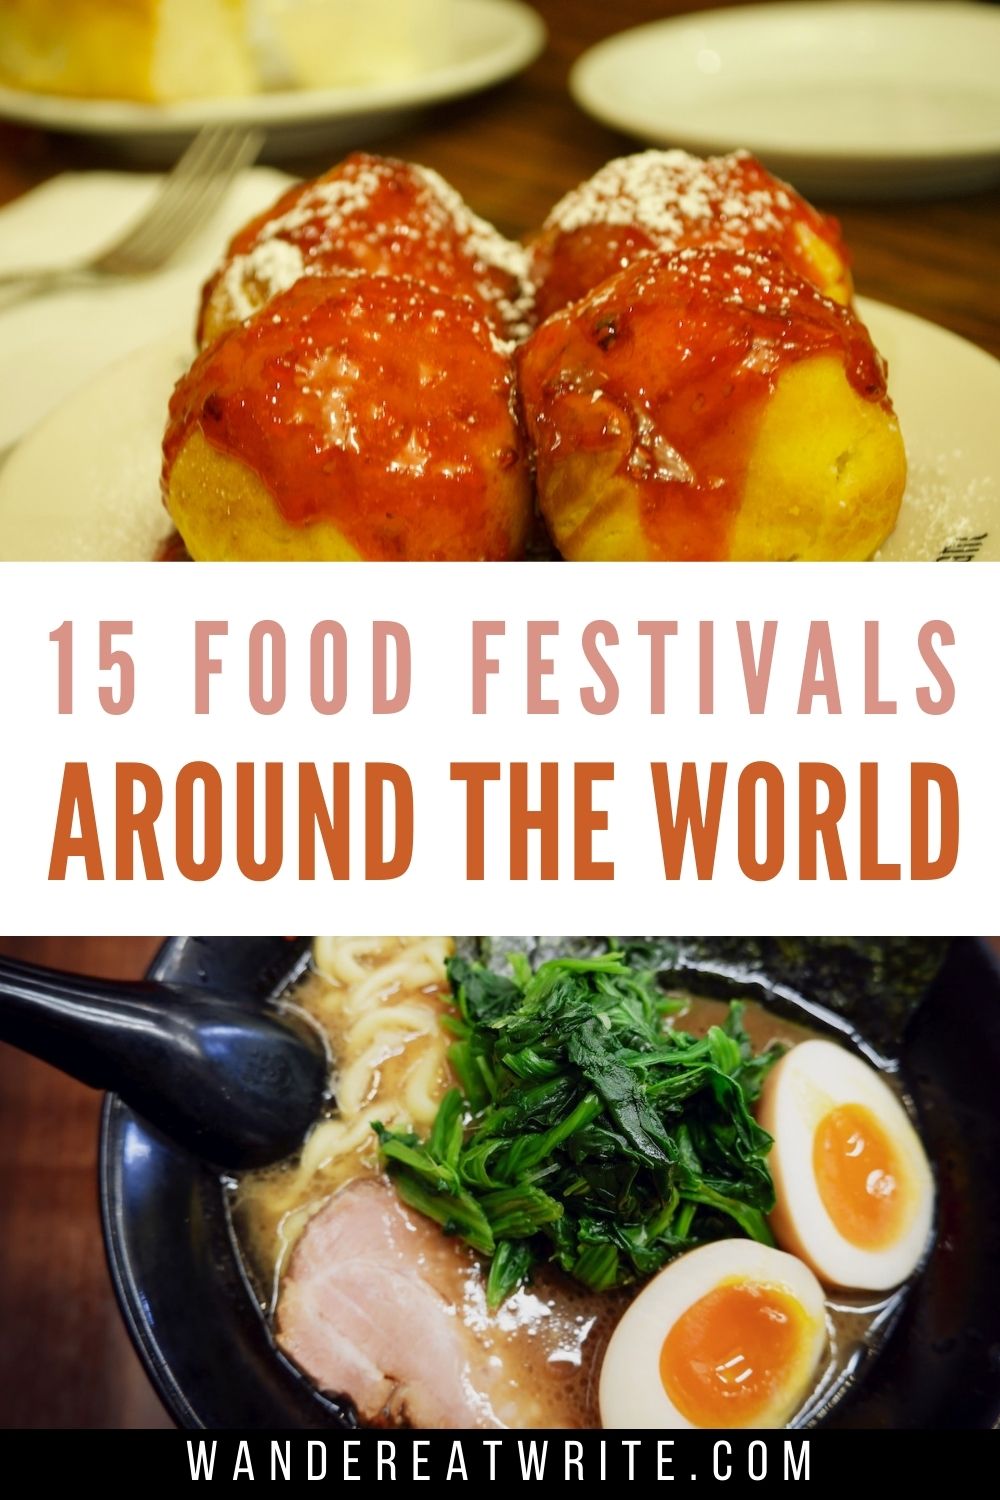 Text: 15 food festivals around the world; top photo: 4 balls of aebleskiver pastries sprinkled with powdered sugar; bottom photo: bowl of ramen noodles with pork, boiled egg cut open and halved; and spinach